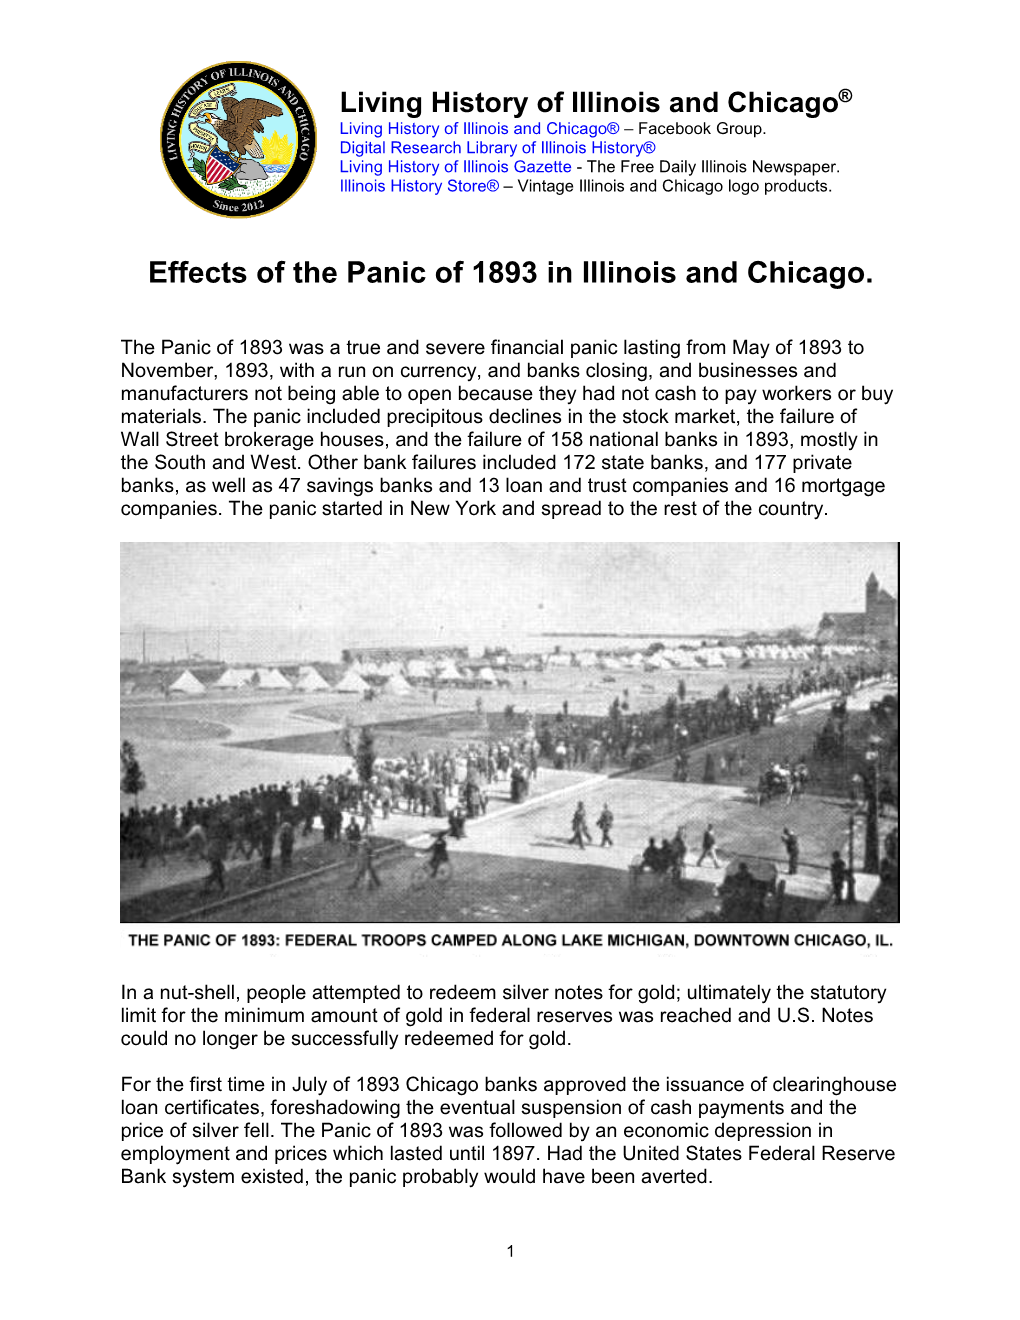 Panic of 1893 in Illinois and Chicago